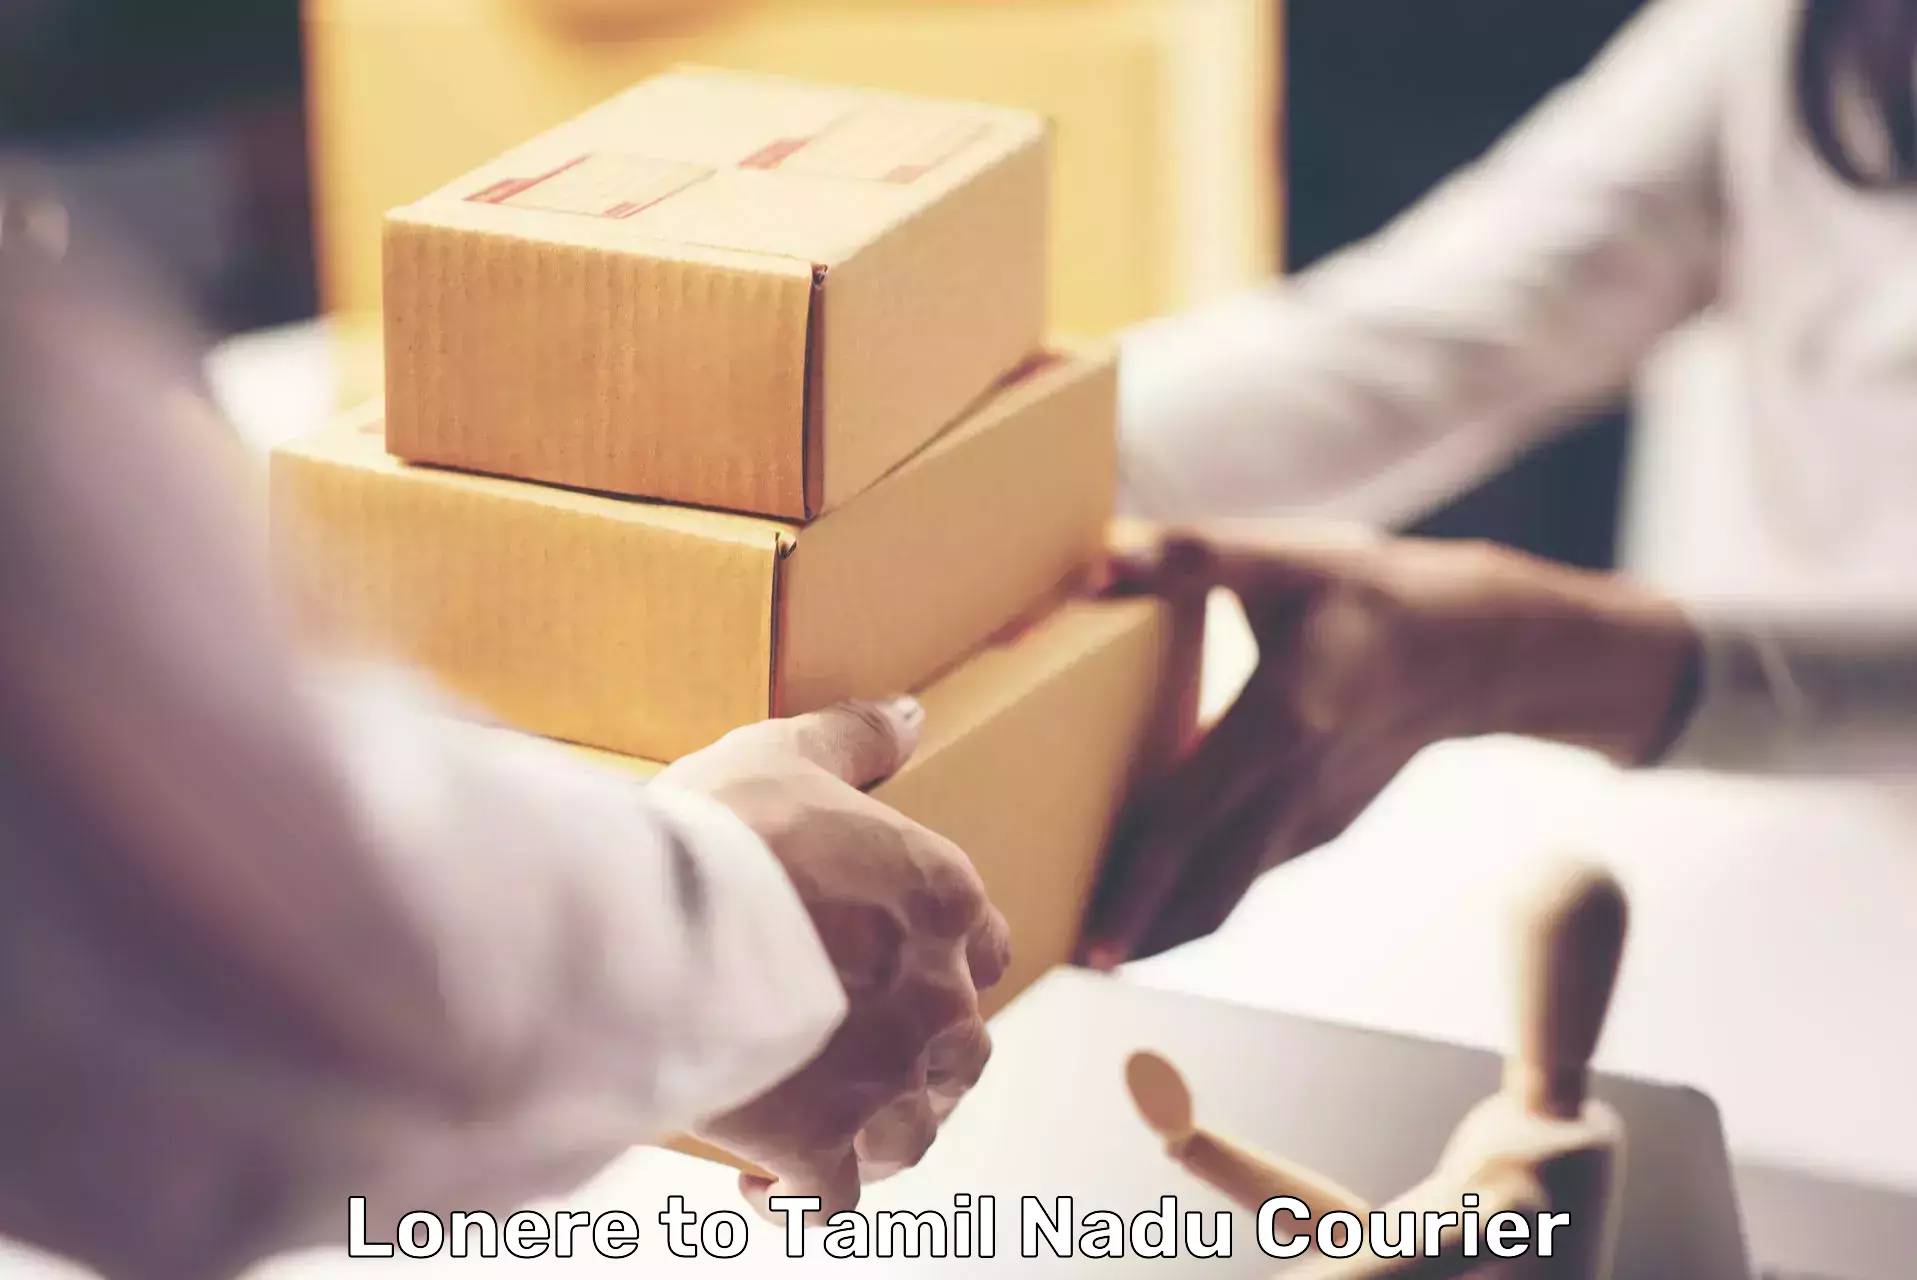 Nationwide courier service Lonere to Vellore Institute of Technology